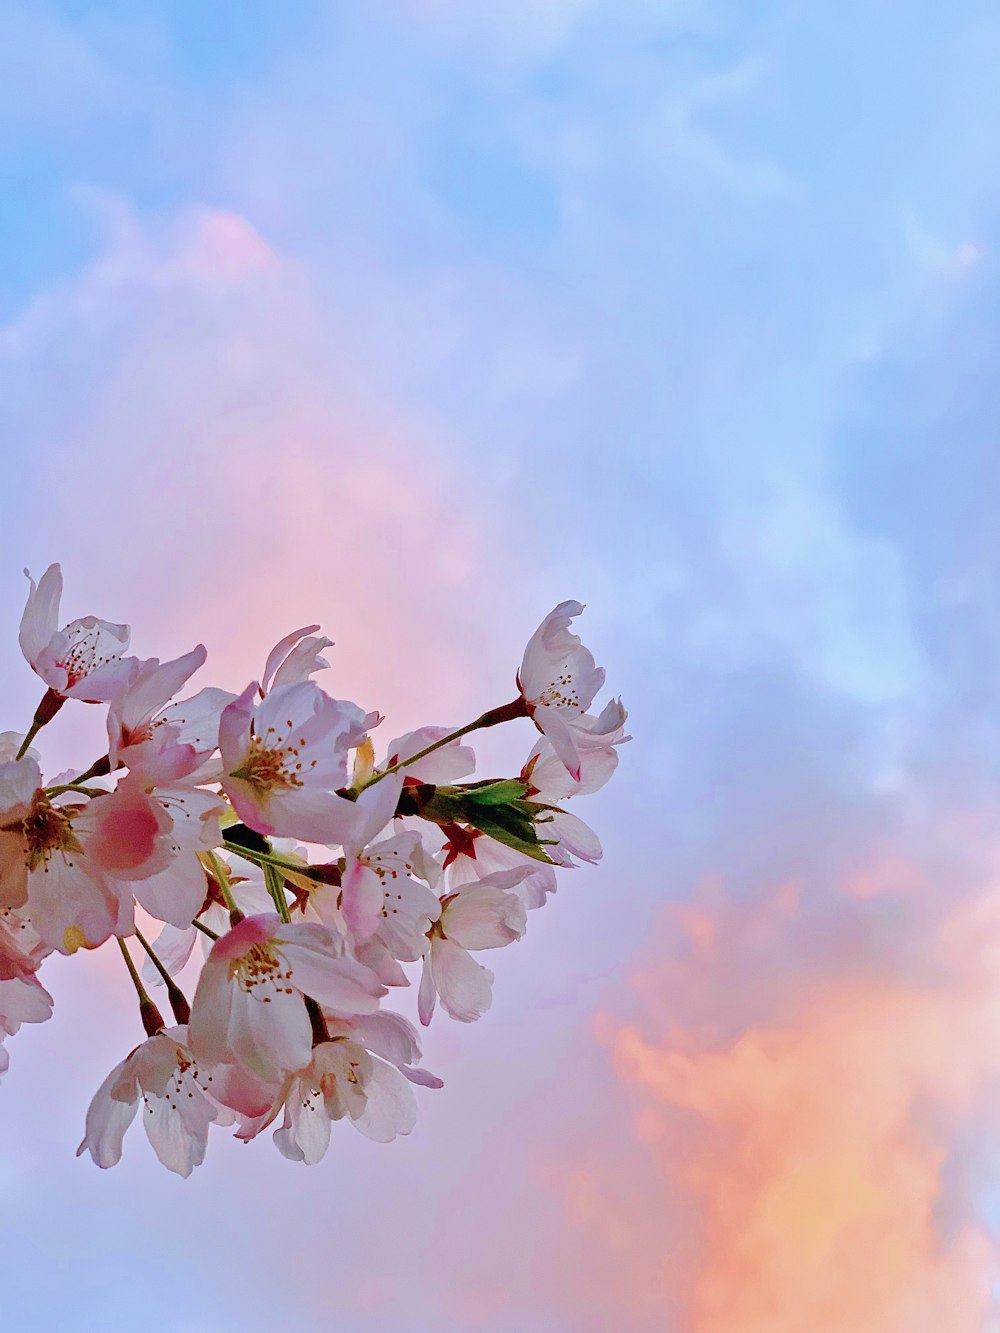 a branch of a cherry blossom against a cloudy sky